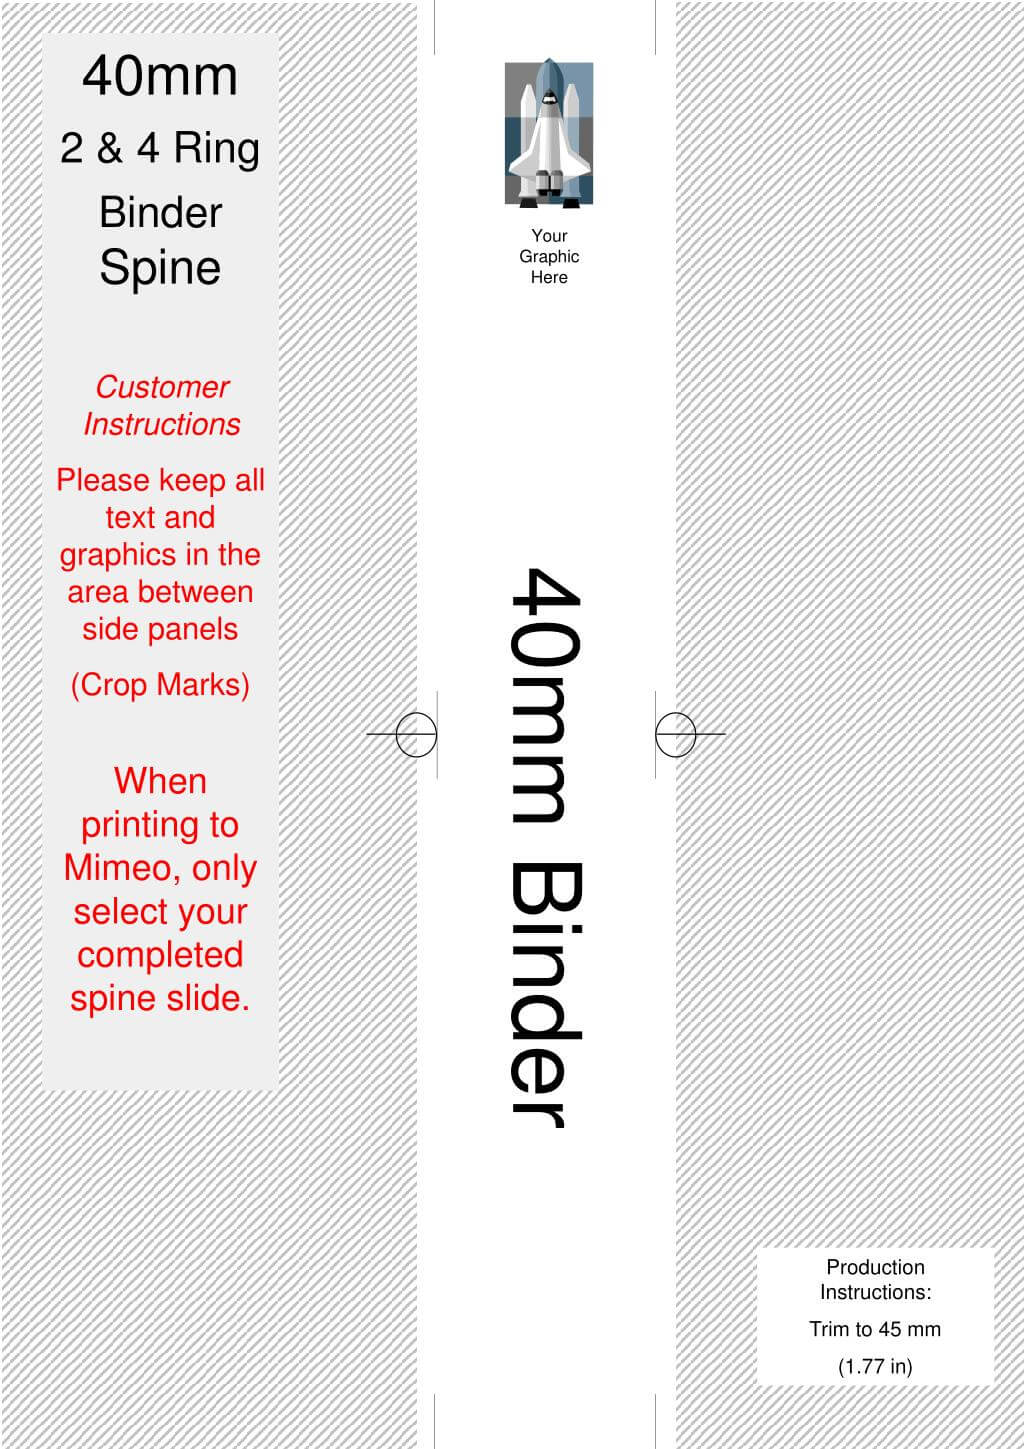 Ppt – Mimeo.co.uk A4 2 & 4 Ring Binders Spine Templates Intended For 2 Inch Binder Spine Template